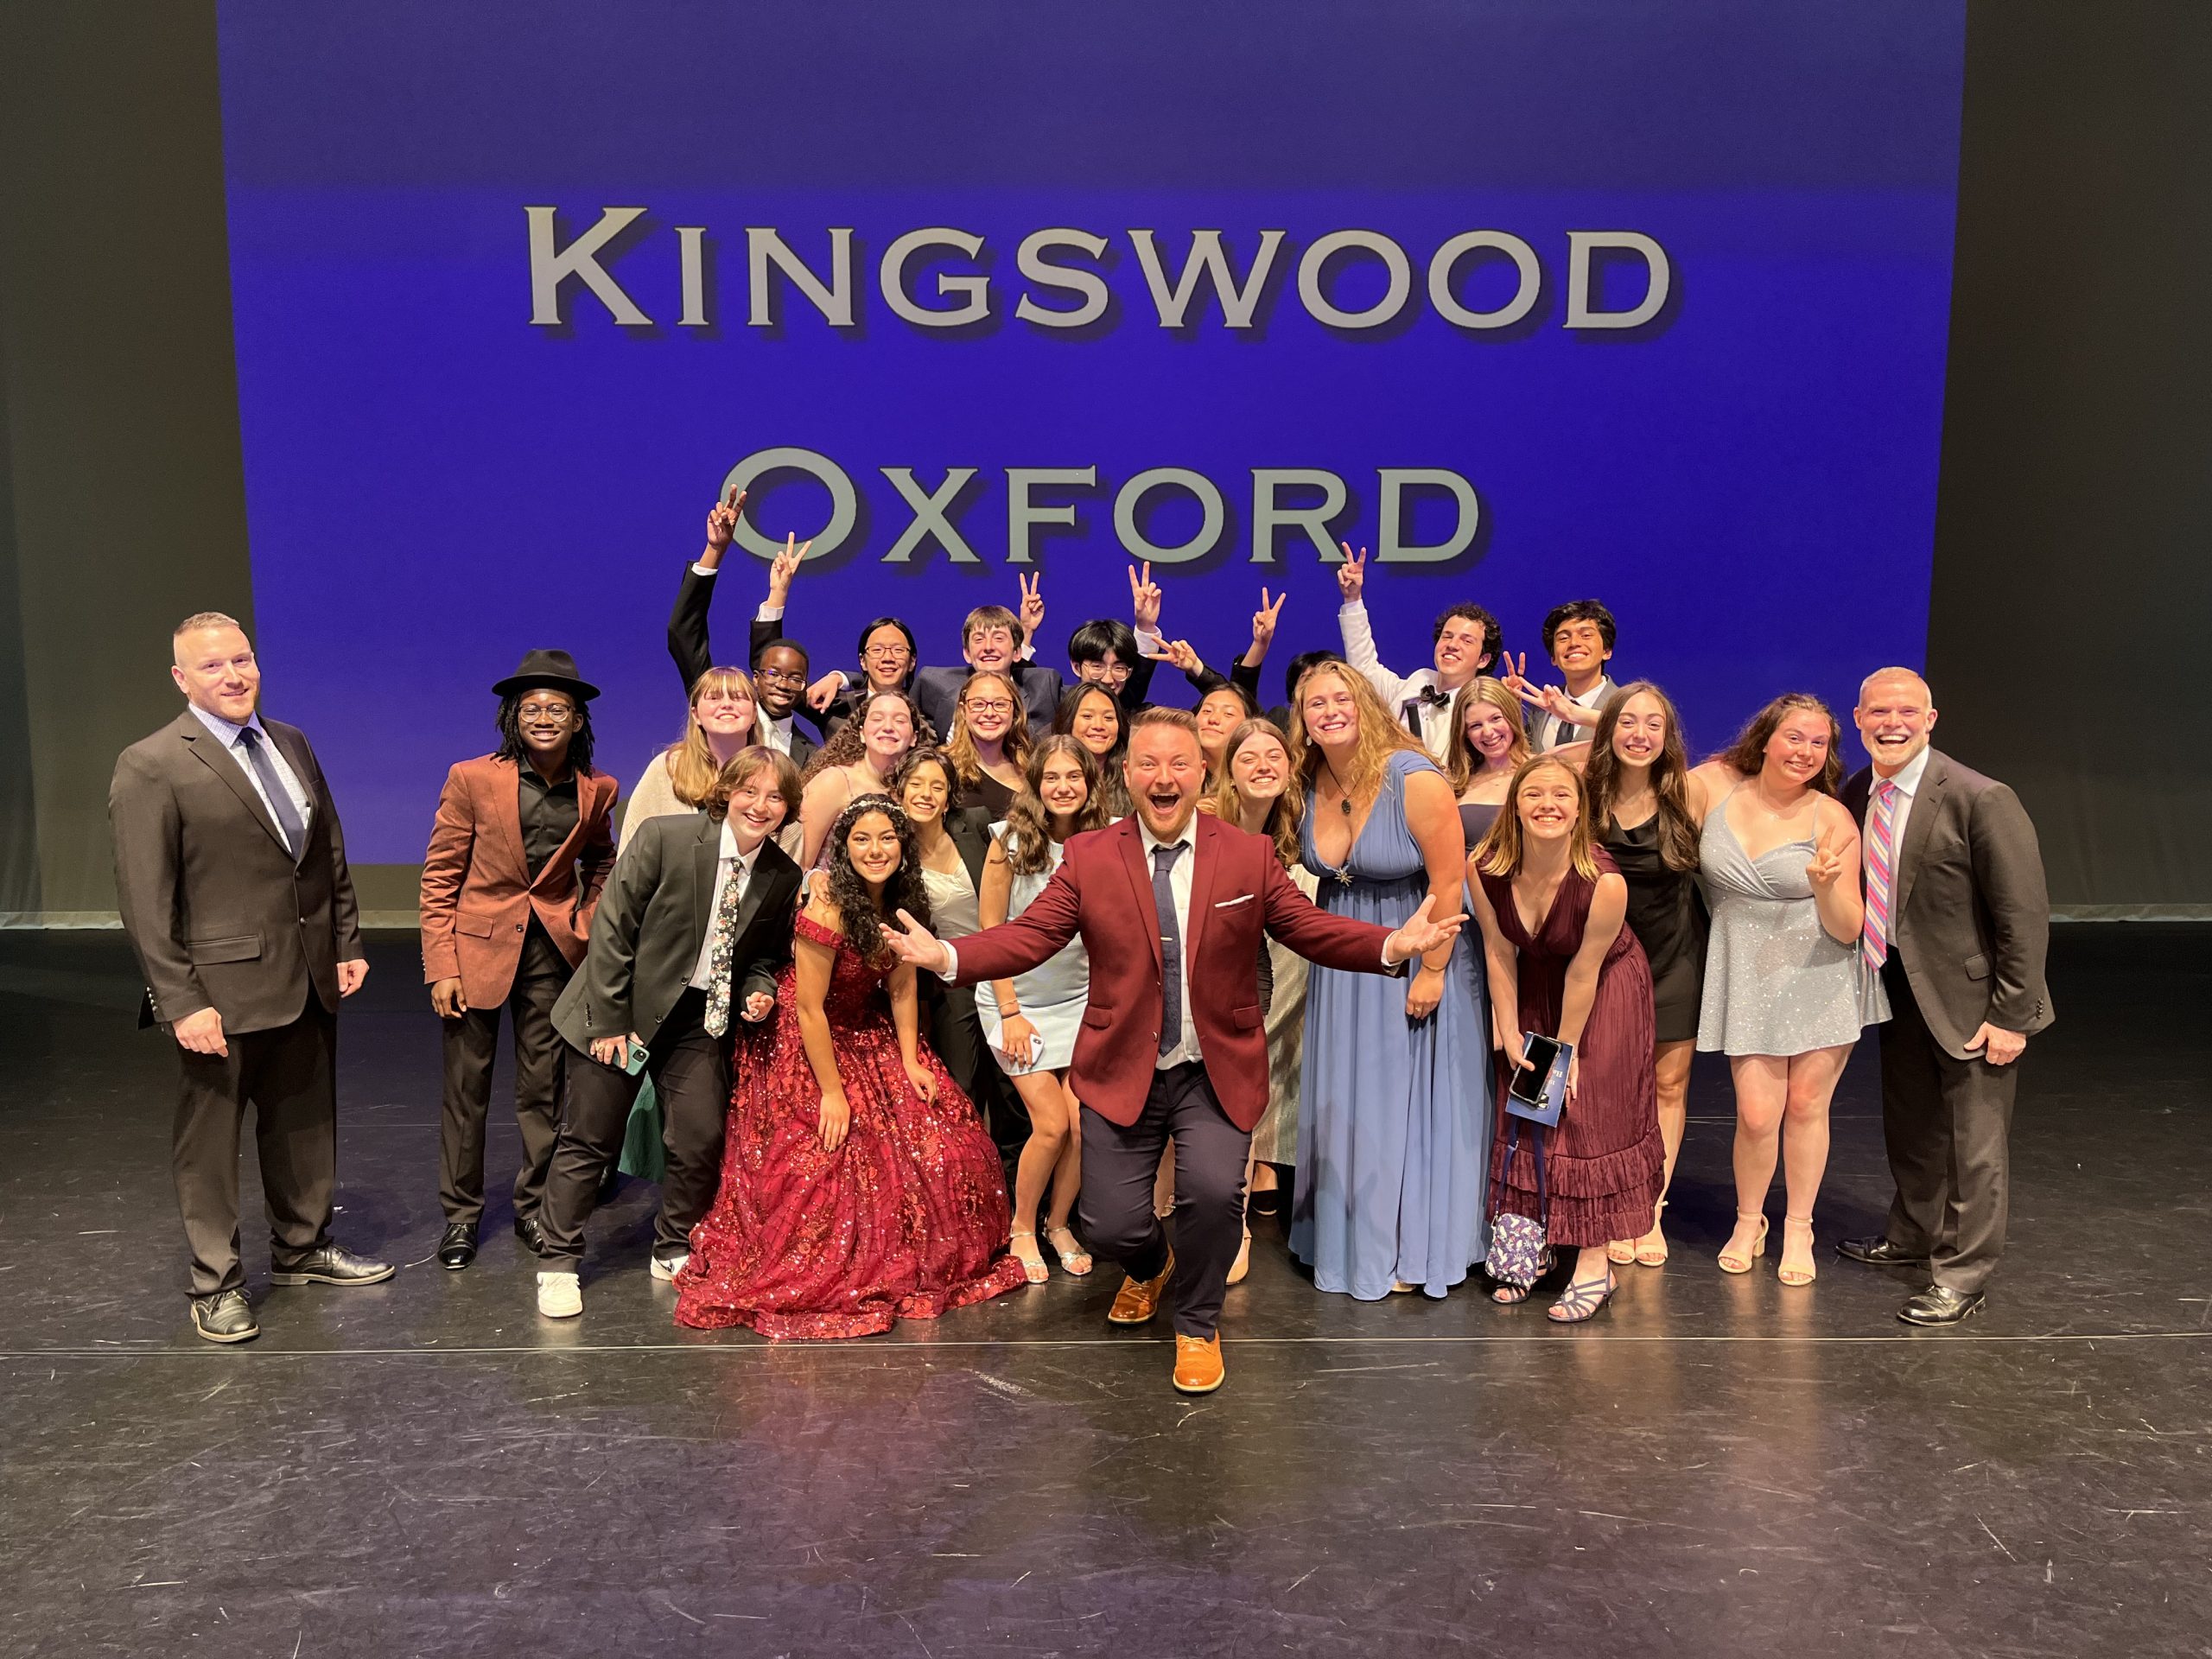 Kingswood Oxford Wins Halo Award for Best High School Musical in